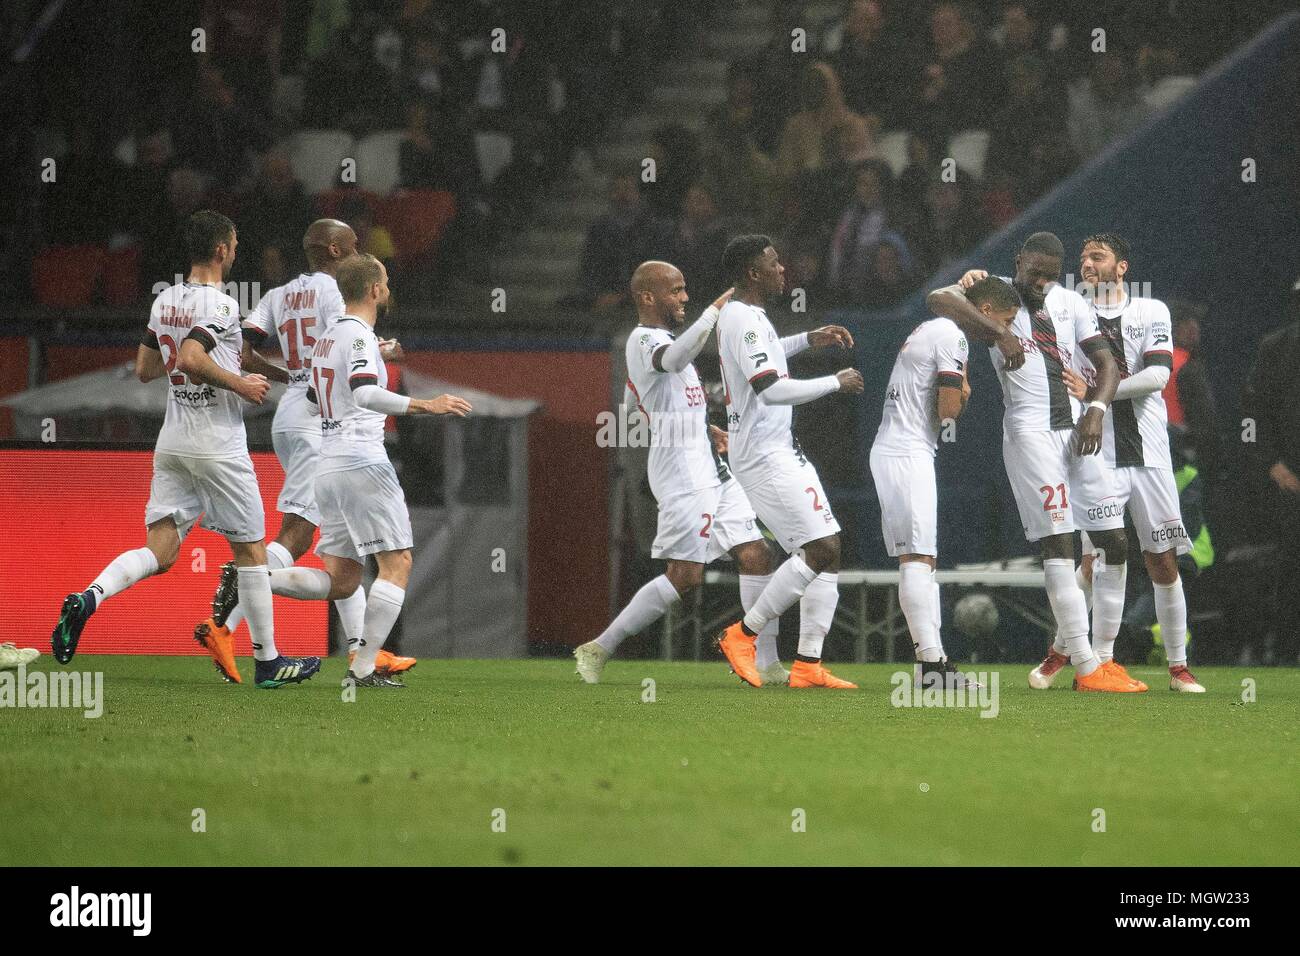 Paris. 29th Apr, 2018. Players from Guingamp celebrate their goal during the match against Paris Saint-Germain of French Ligue 1 2017-18 season 35th round in Paris, France on April 29, 2018. Paris Saint-Germain equals Guingamp with 2-2 at home. Credit: Jack Chan/Xinhua/Alamy Live News Stock Photo